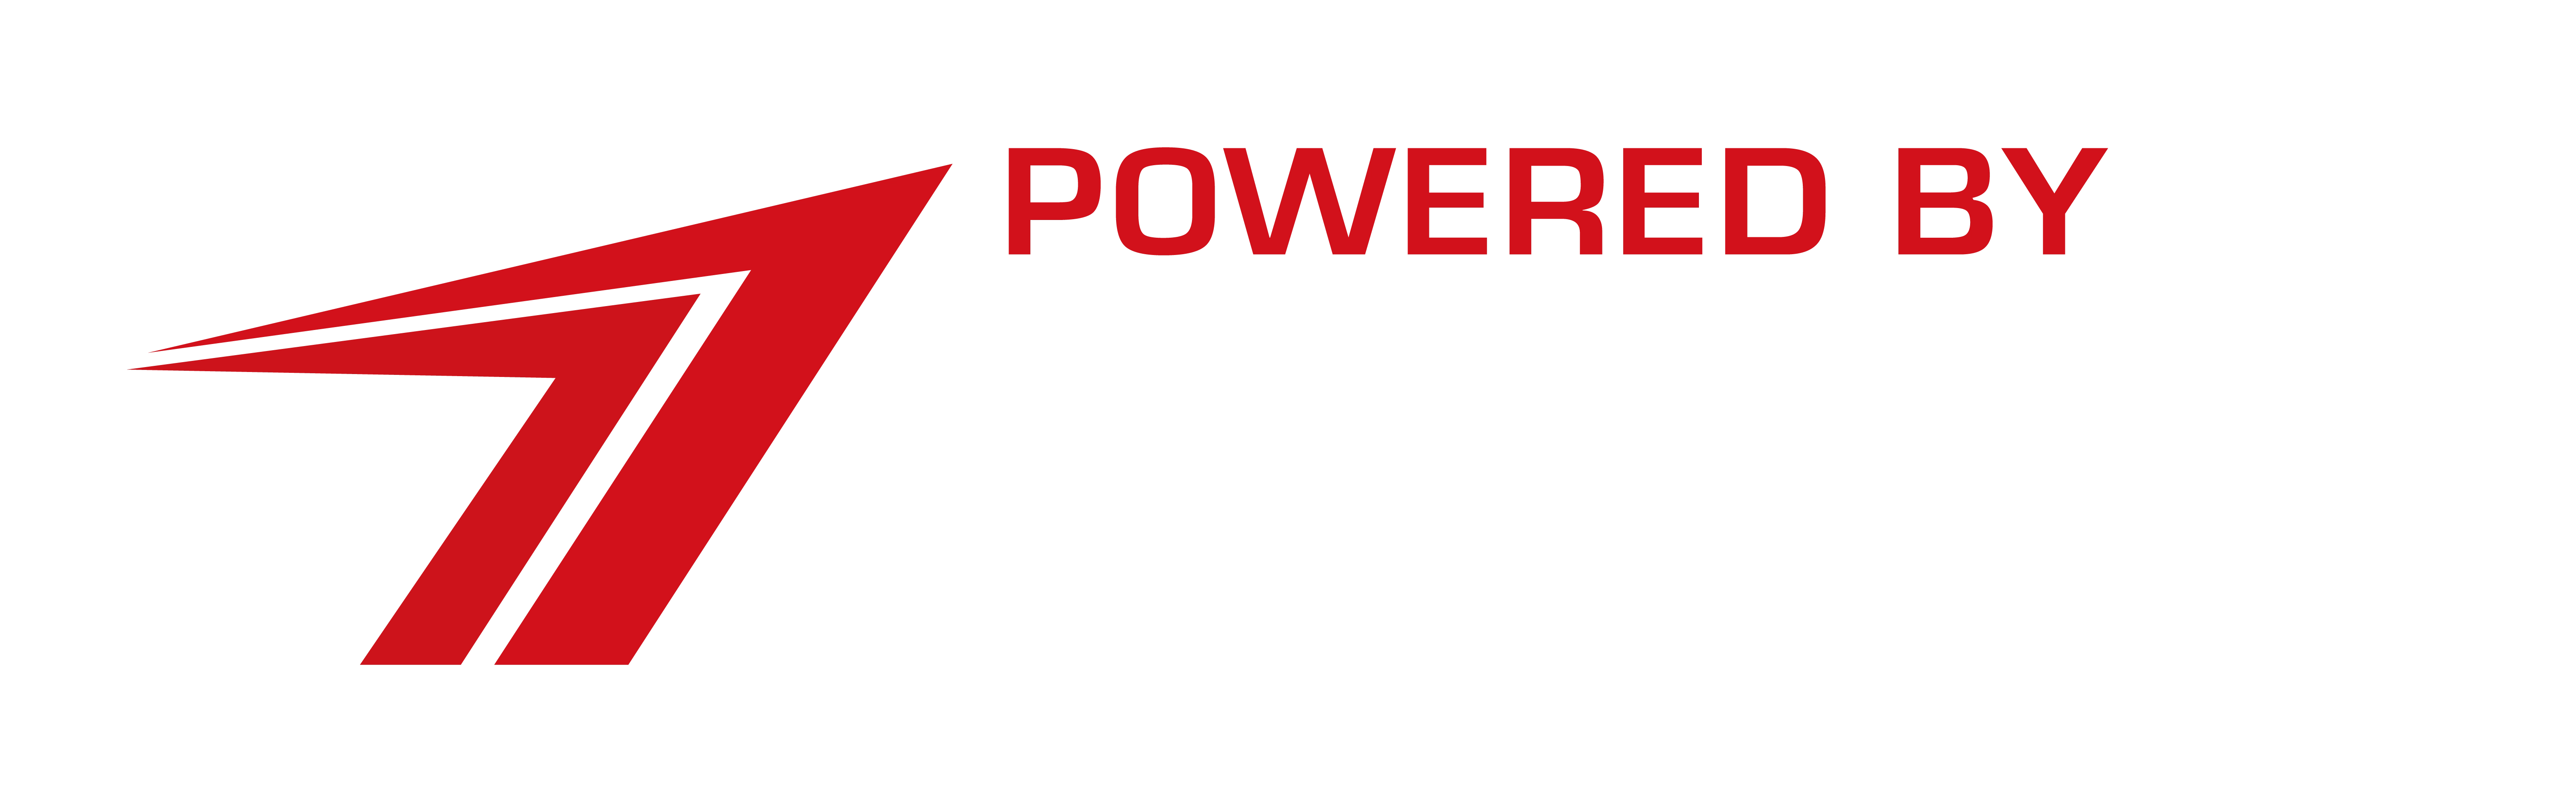 Powered By ASUS Logotipo